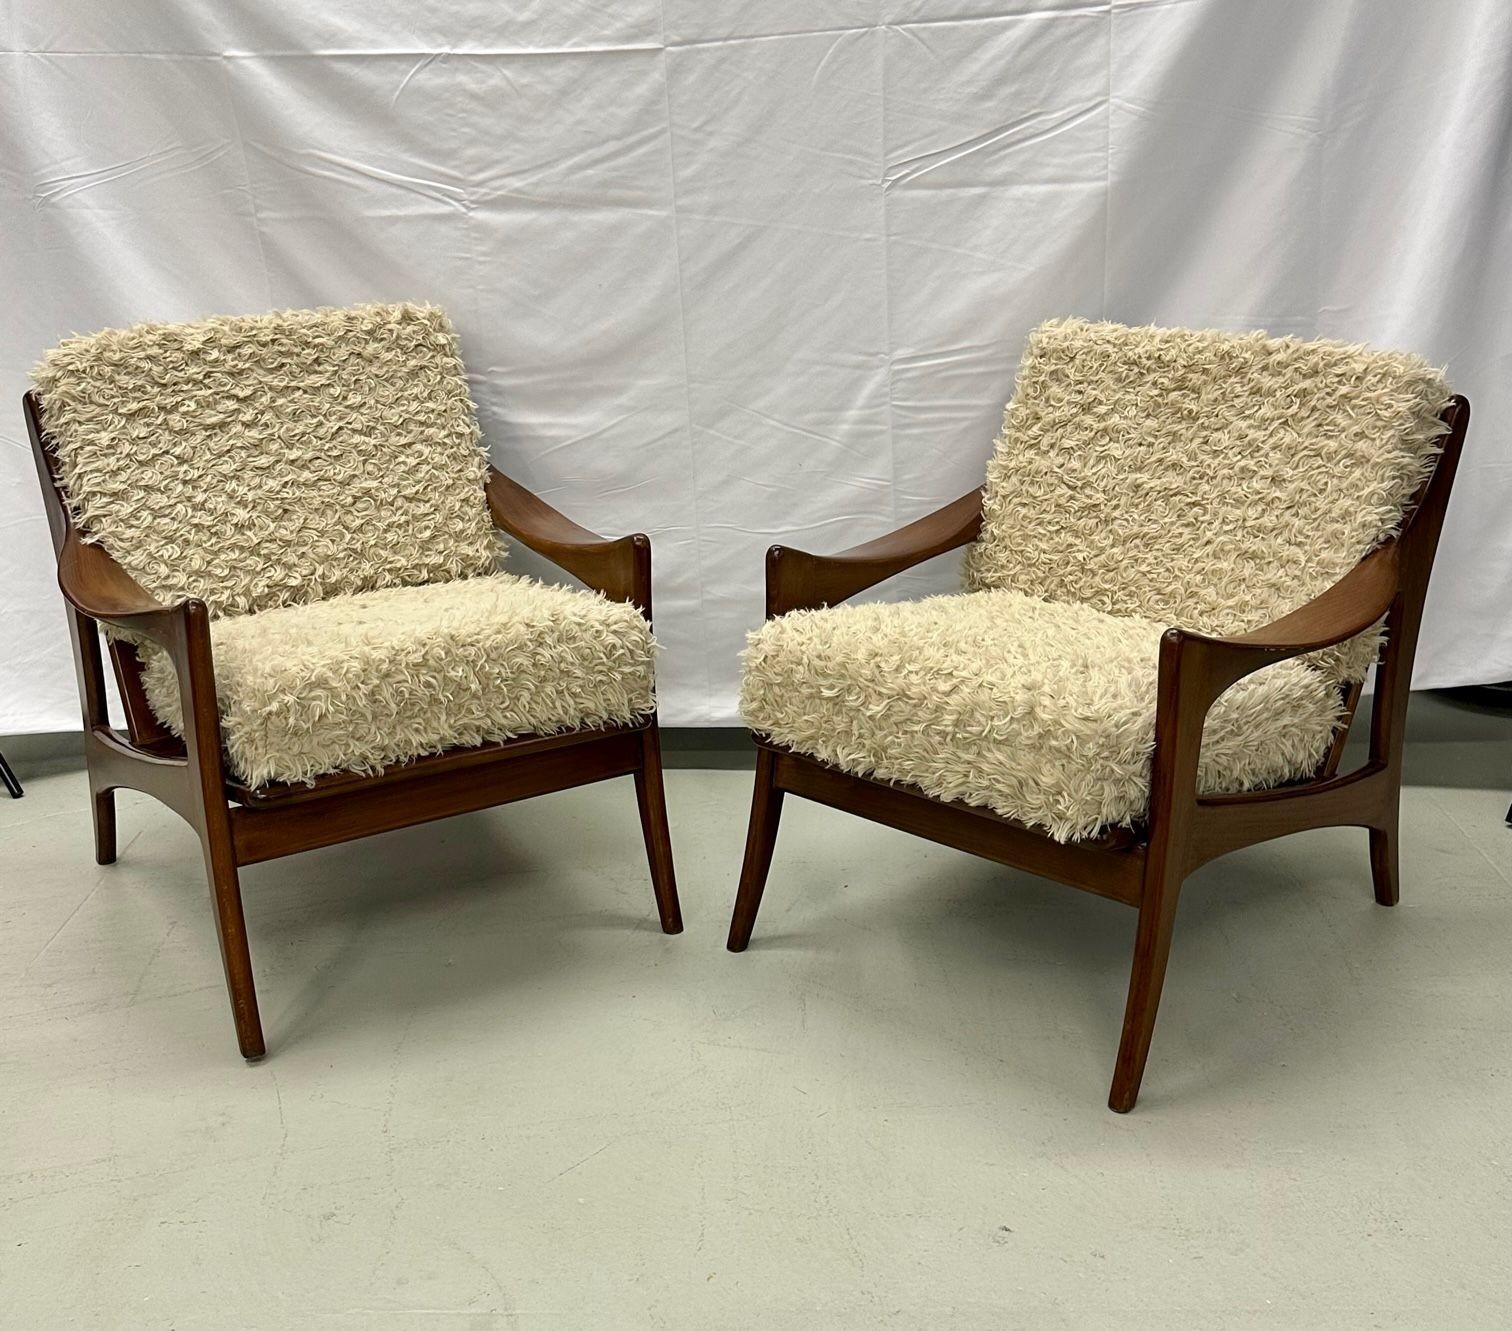 Pair of Dutch Mid-Century Modern Style Arm / Lounge Chairs, Teak, Brass For Sale 11